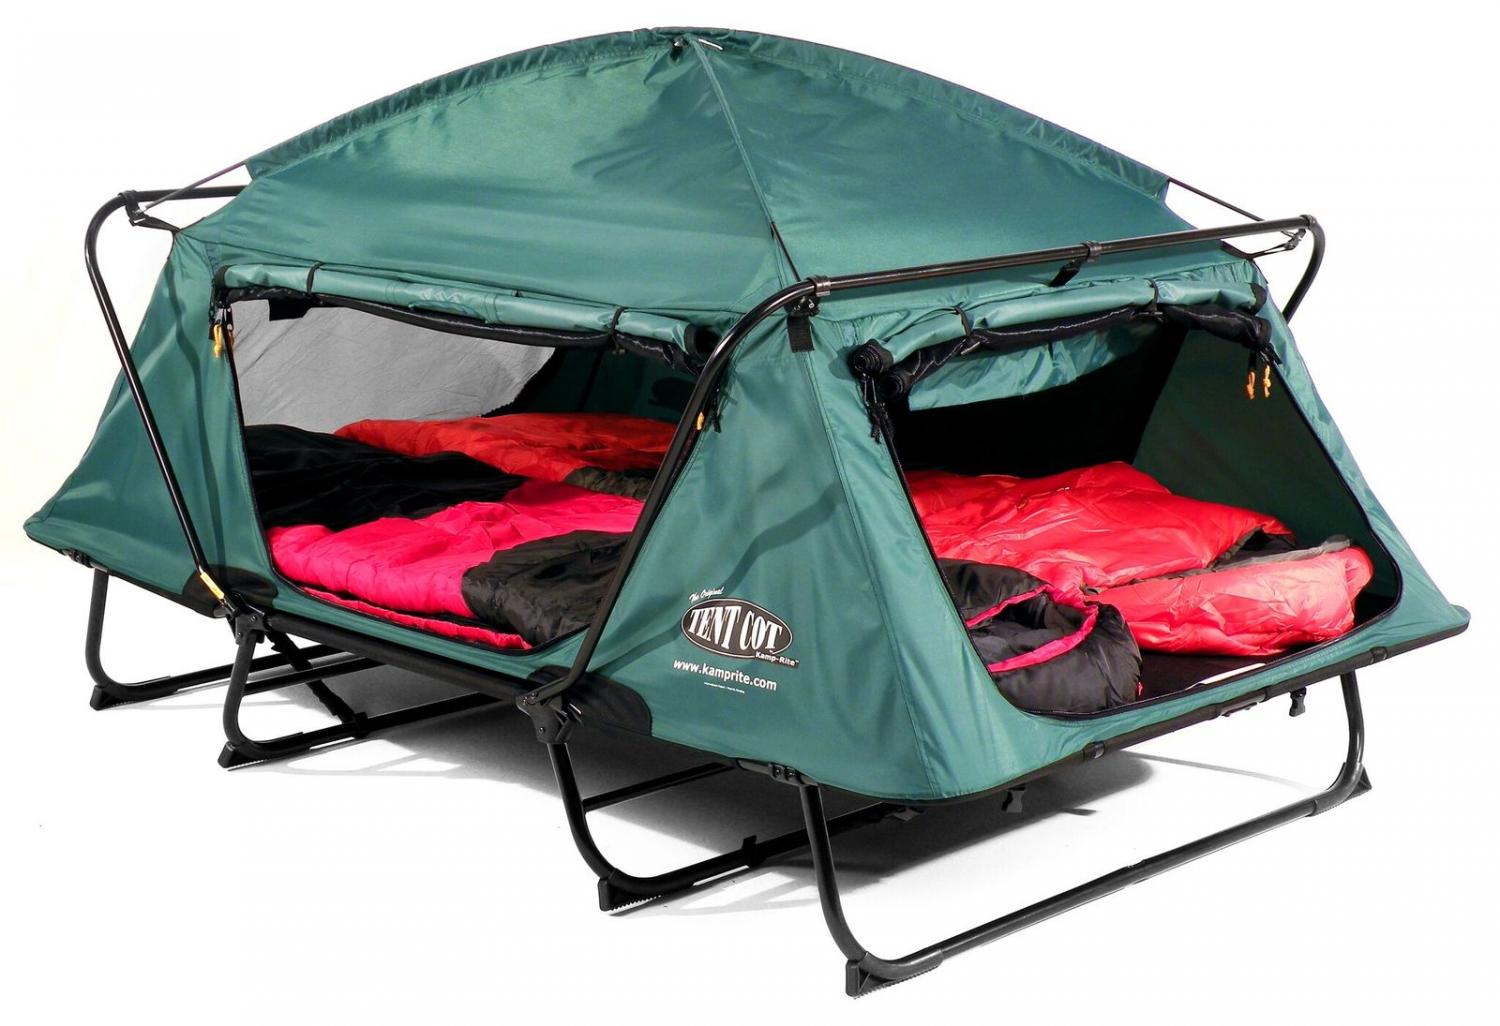 WoodbellmuWintMing Camping Cots and Rainfly Backpacking Nets Bed Hiking ...